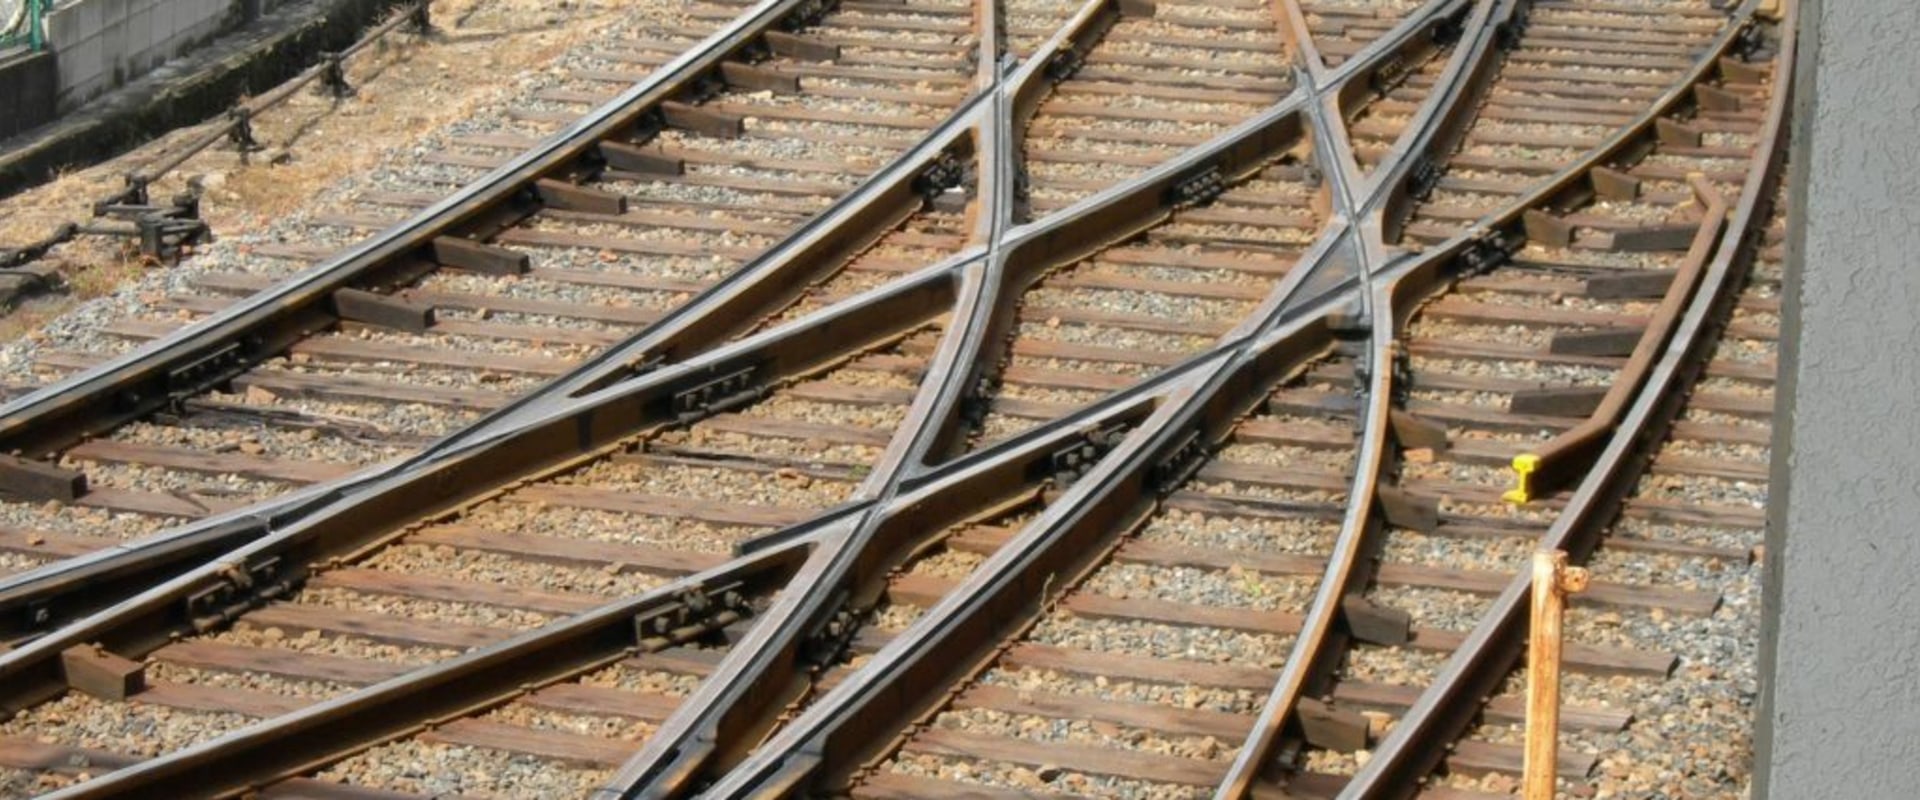 Career Paths in Railroad Safety